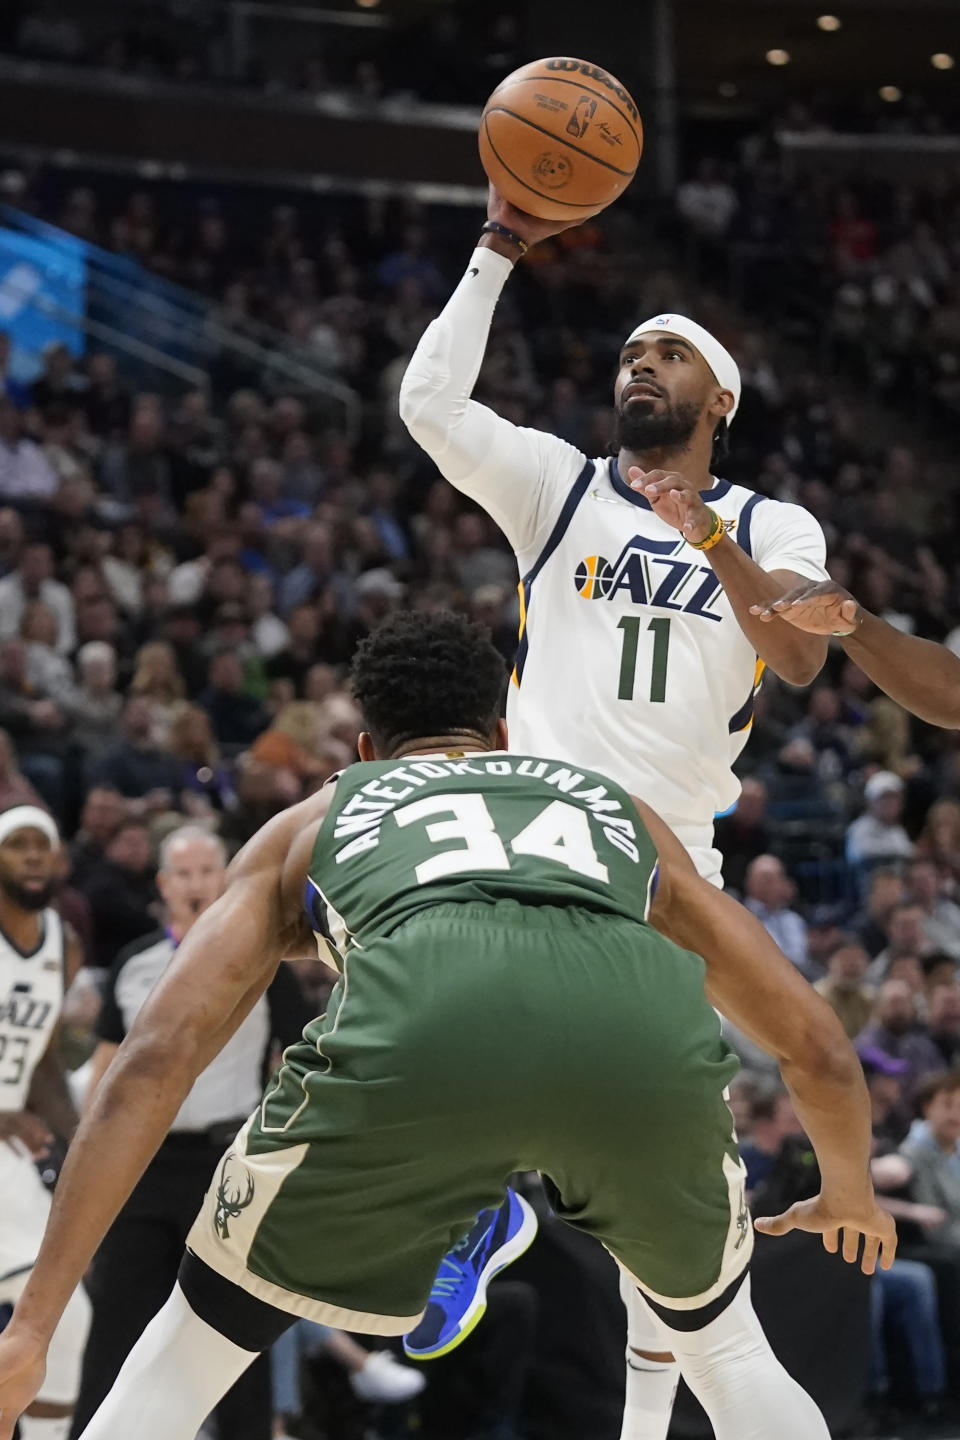 Utah Jazz guard Mike Conley (11) shoots as Milwaukee Bucks forward Giannis Antetokounmpo (34) defends during the first half of an NBA basketball game Monday, March 14, 2022, in Salt Lake City. (AP Photo/Rick Bowmer)